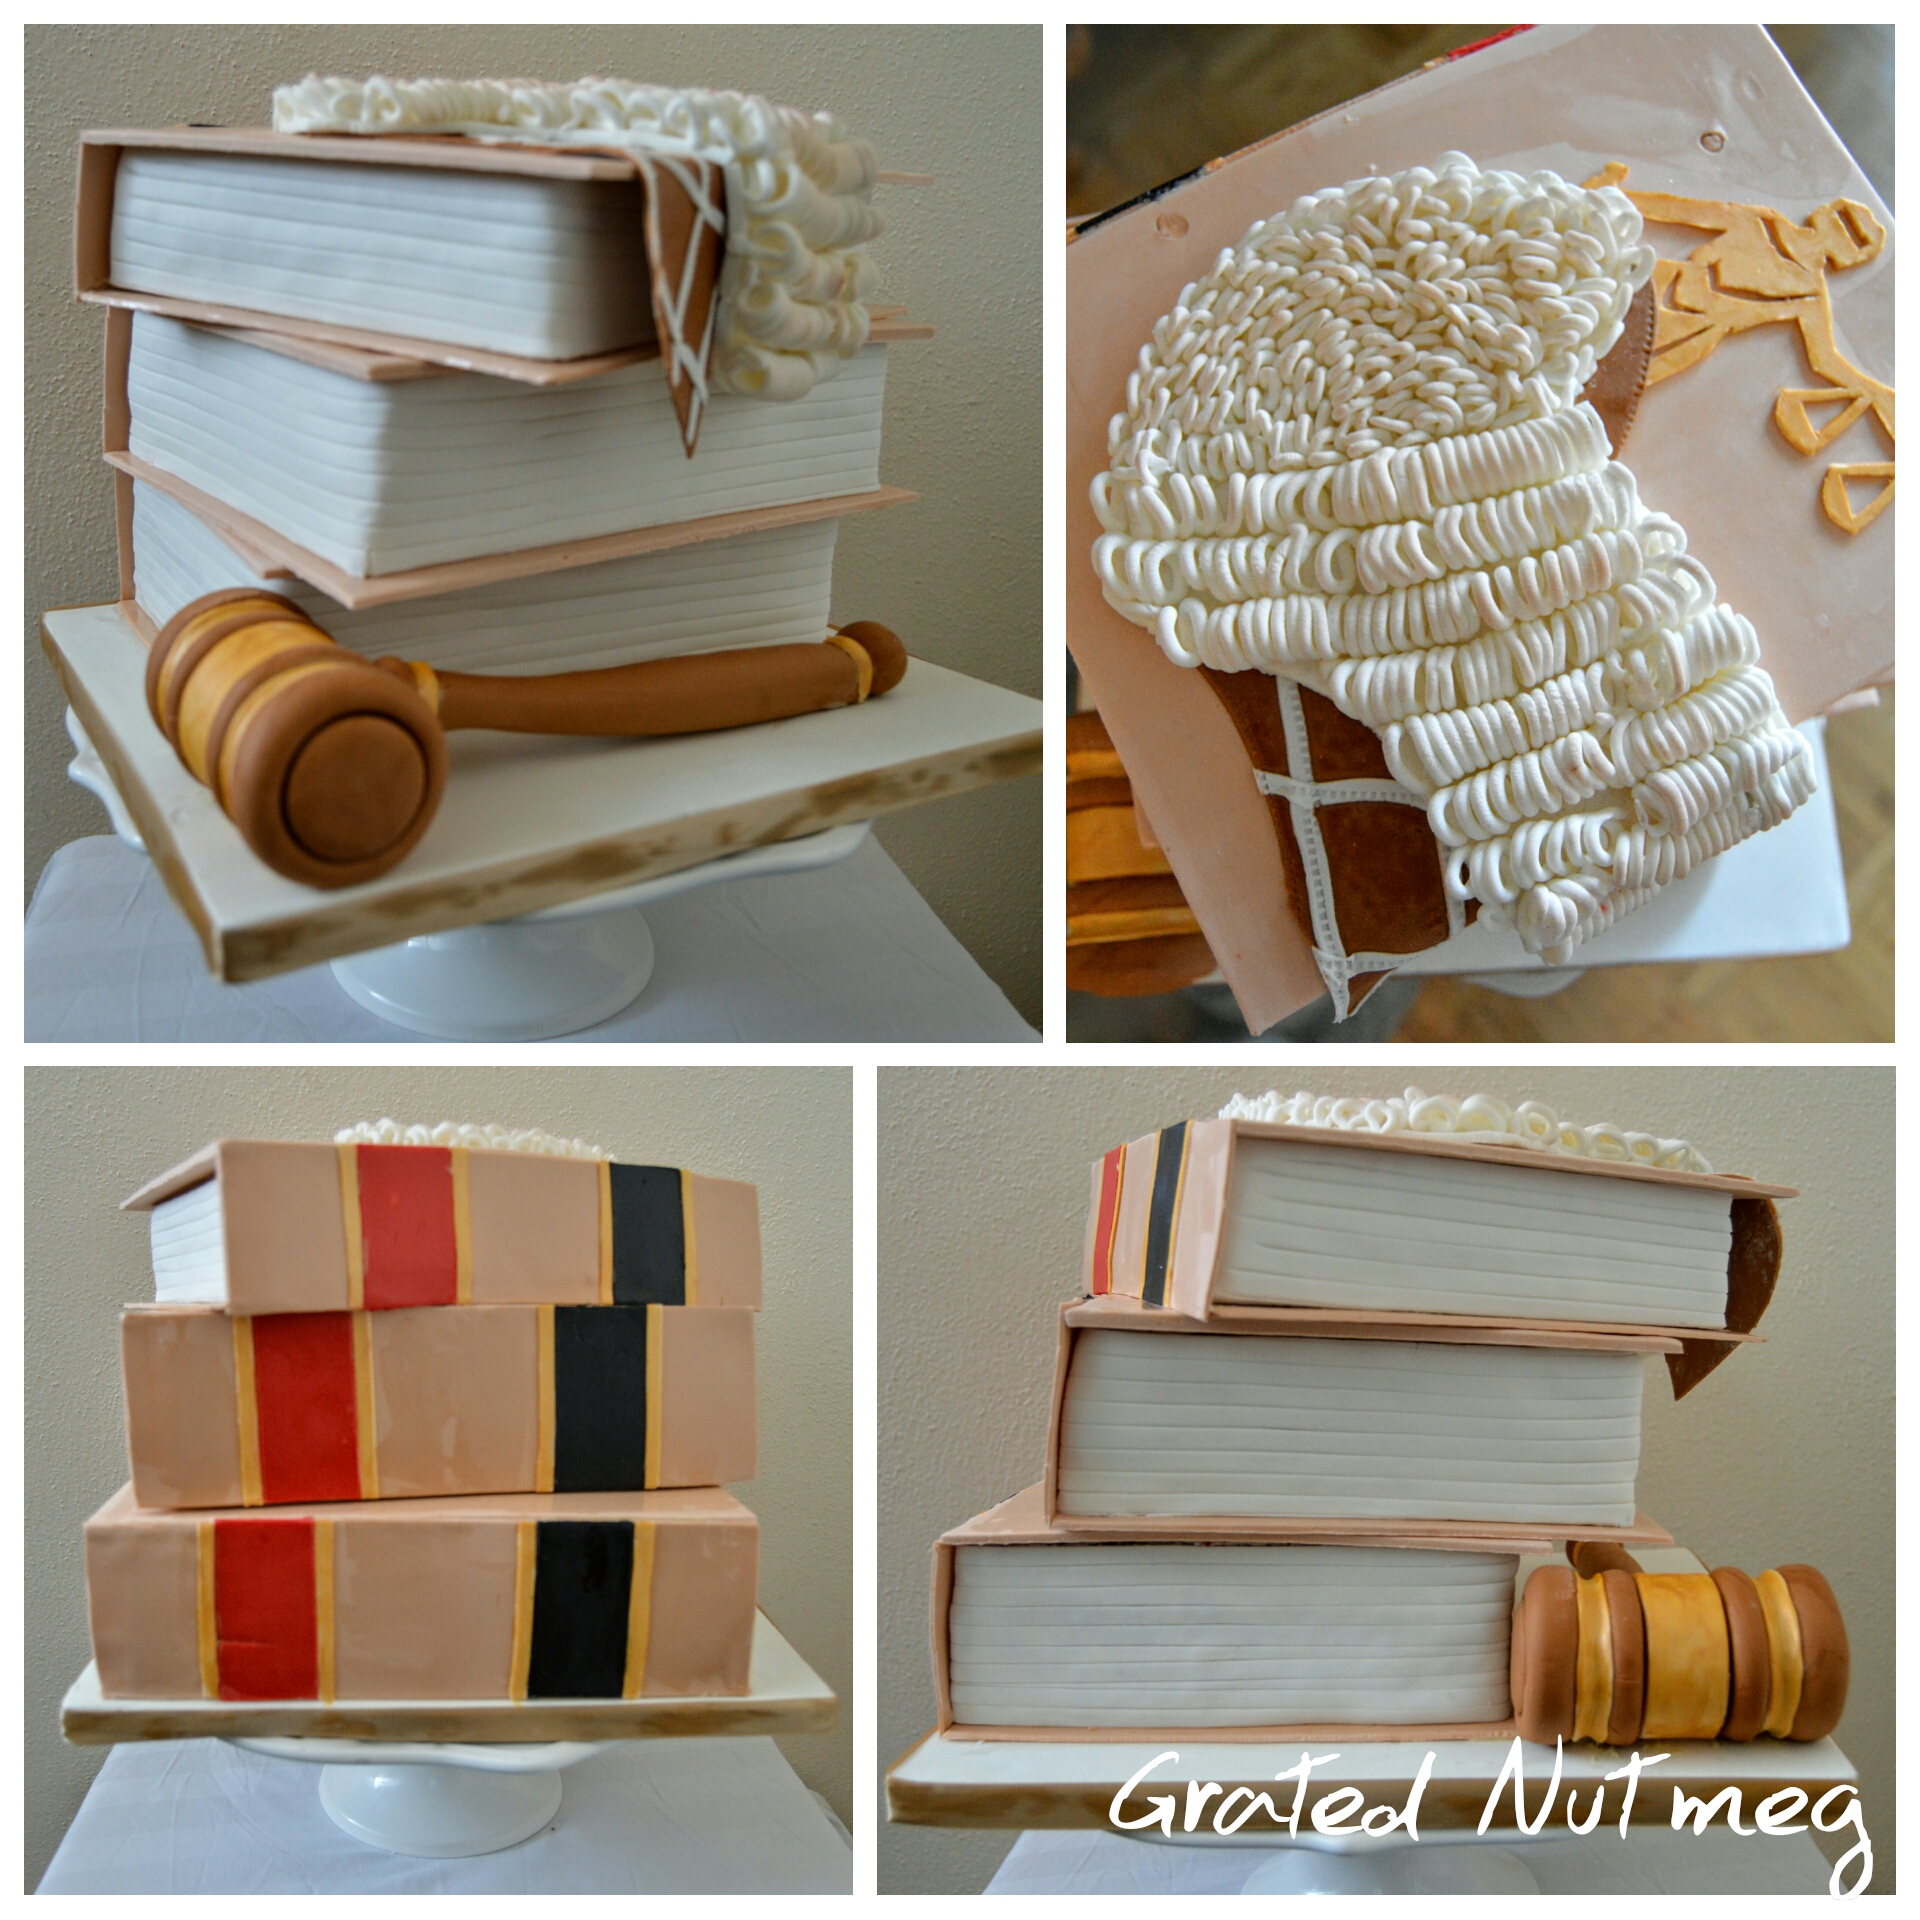 The Making of a Law Review Cake